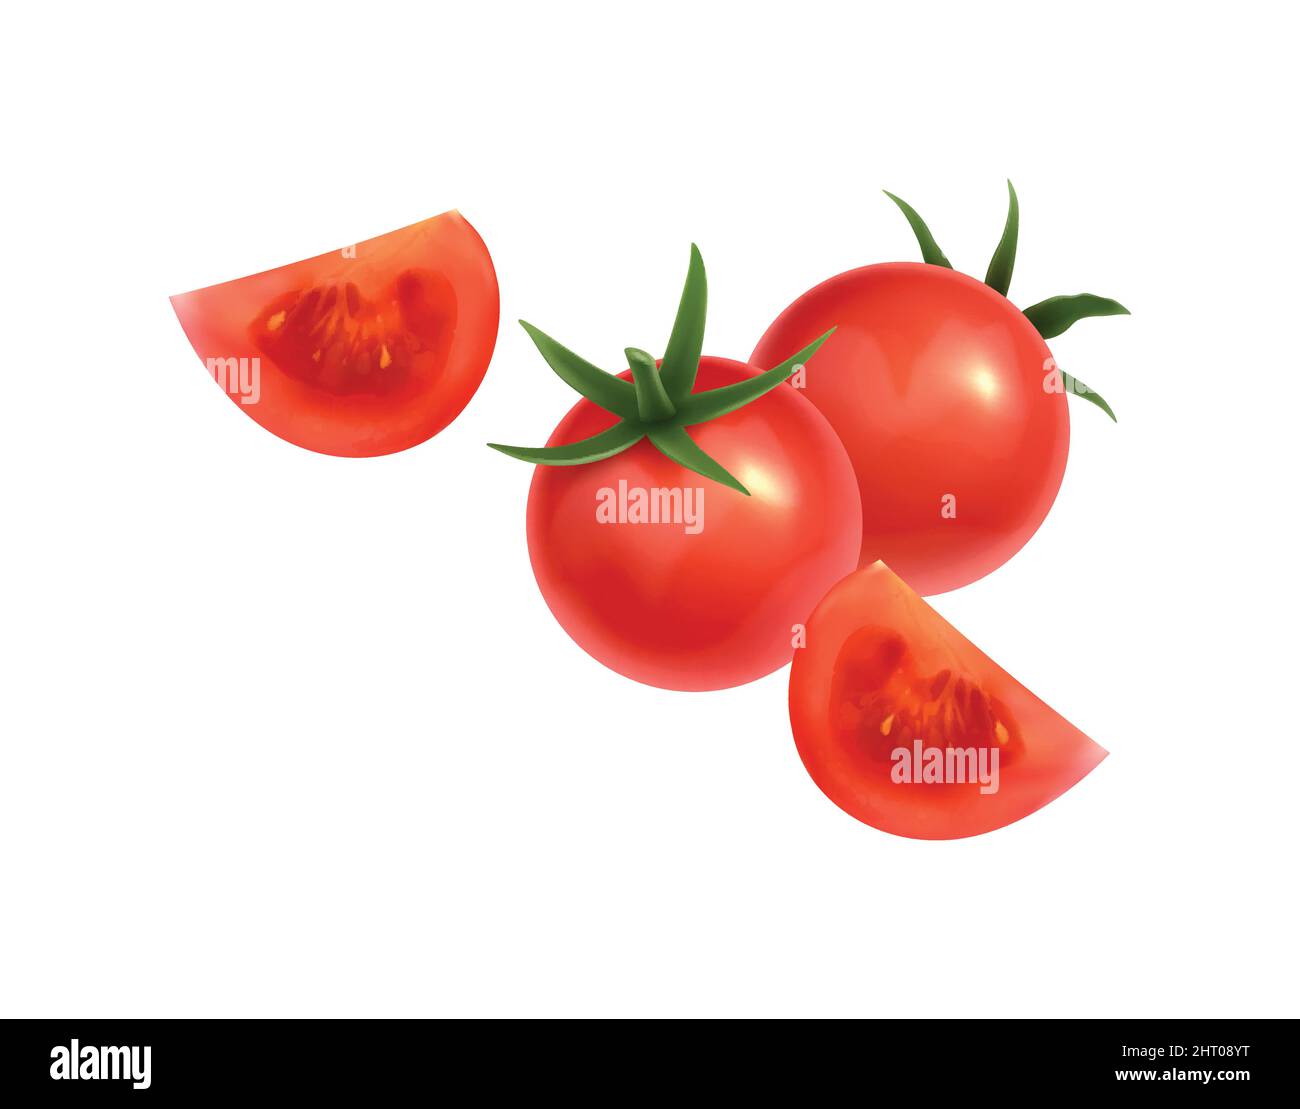 Realistic icon with whole tomatoes and slices of red color vector illustration Stock Vector